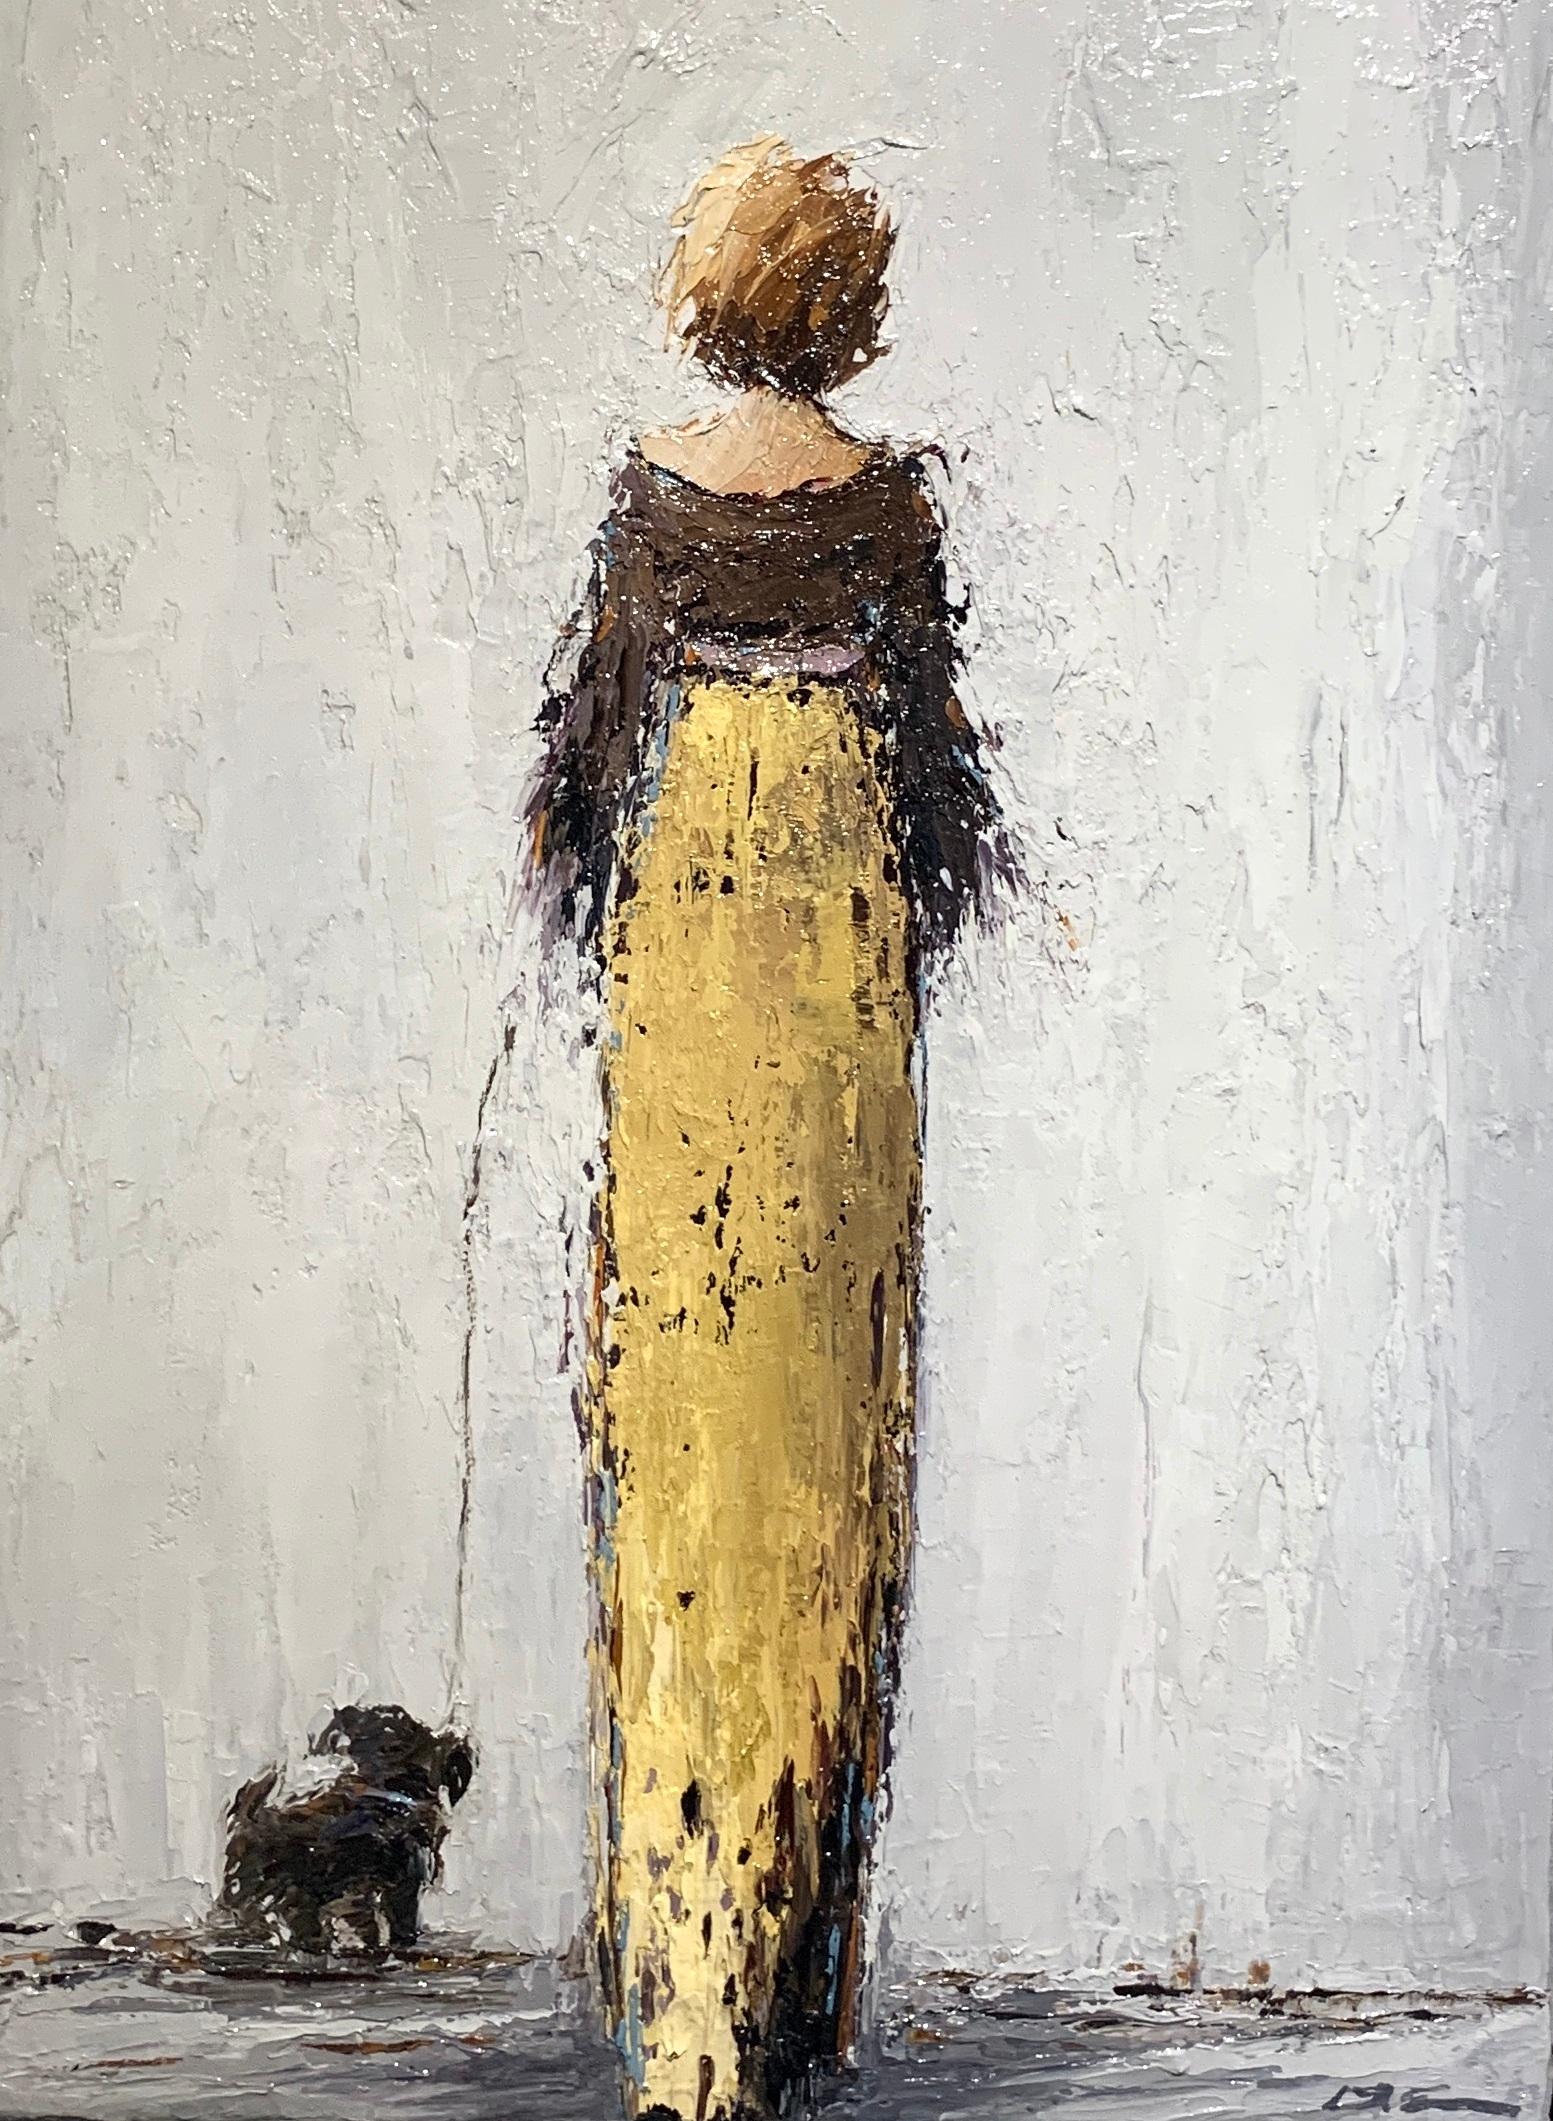 'My Best Friend' is a petite framed Impressionist oil on canvas painting created by American artist Geri Eubanks in 2020. Featuring a vertical format, the painting depicts a blond-haired woman seen from the back, walking her small dog on a leash.